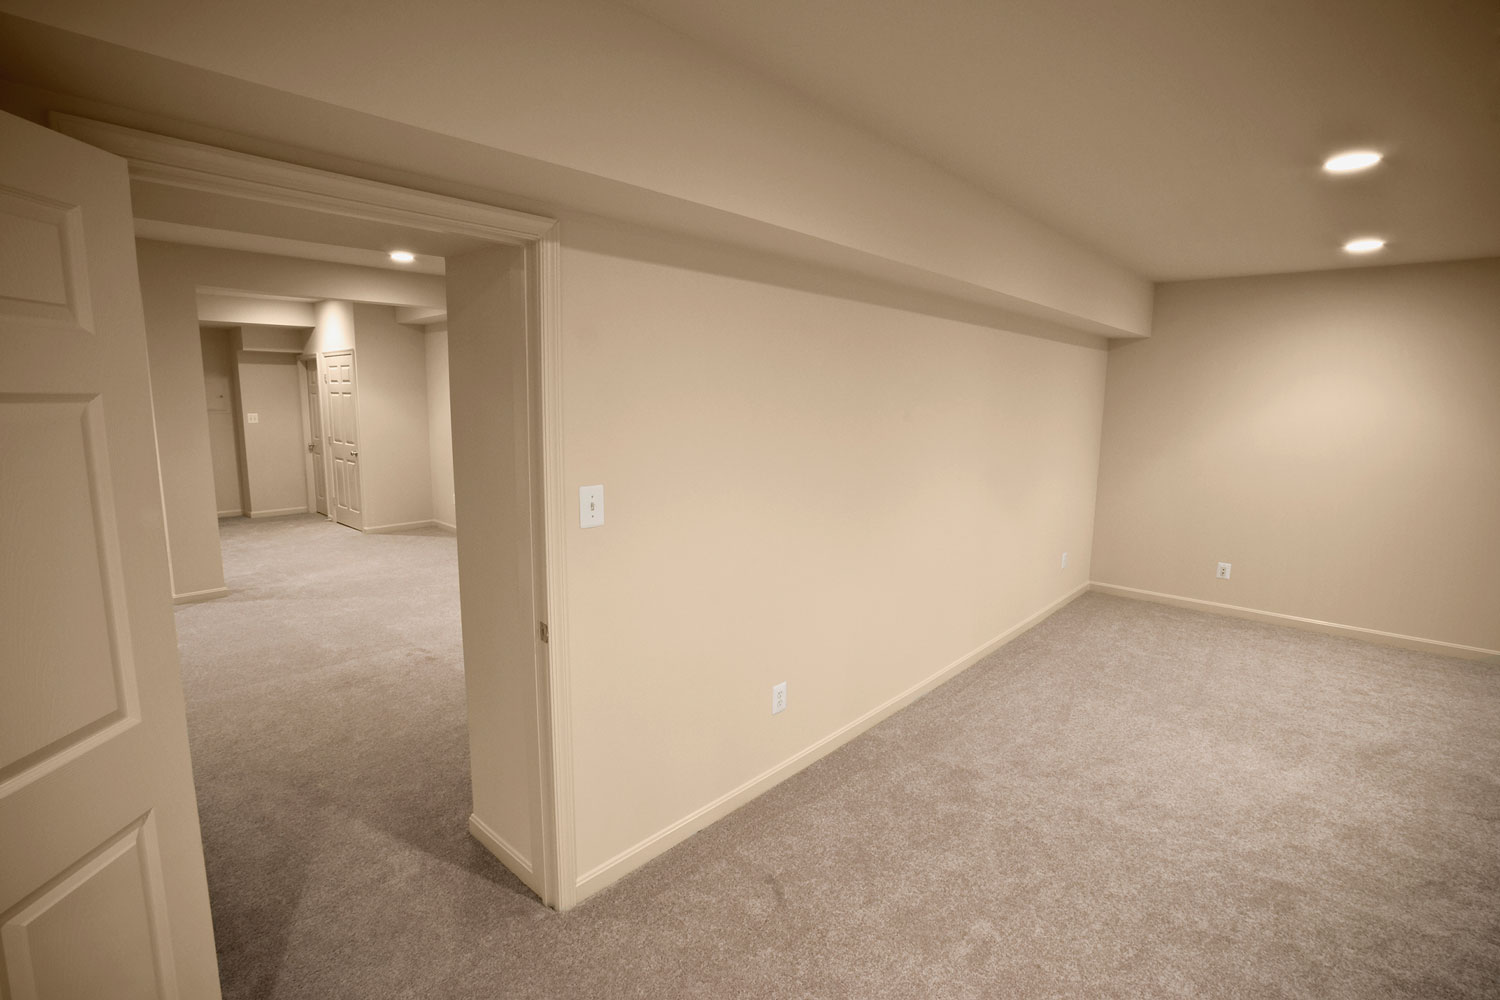 Cream painted walls, carpeted flooring inside an empty living room